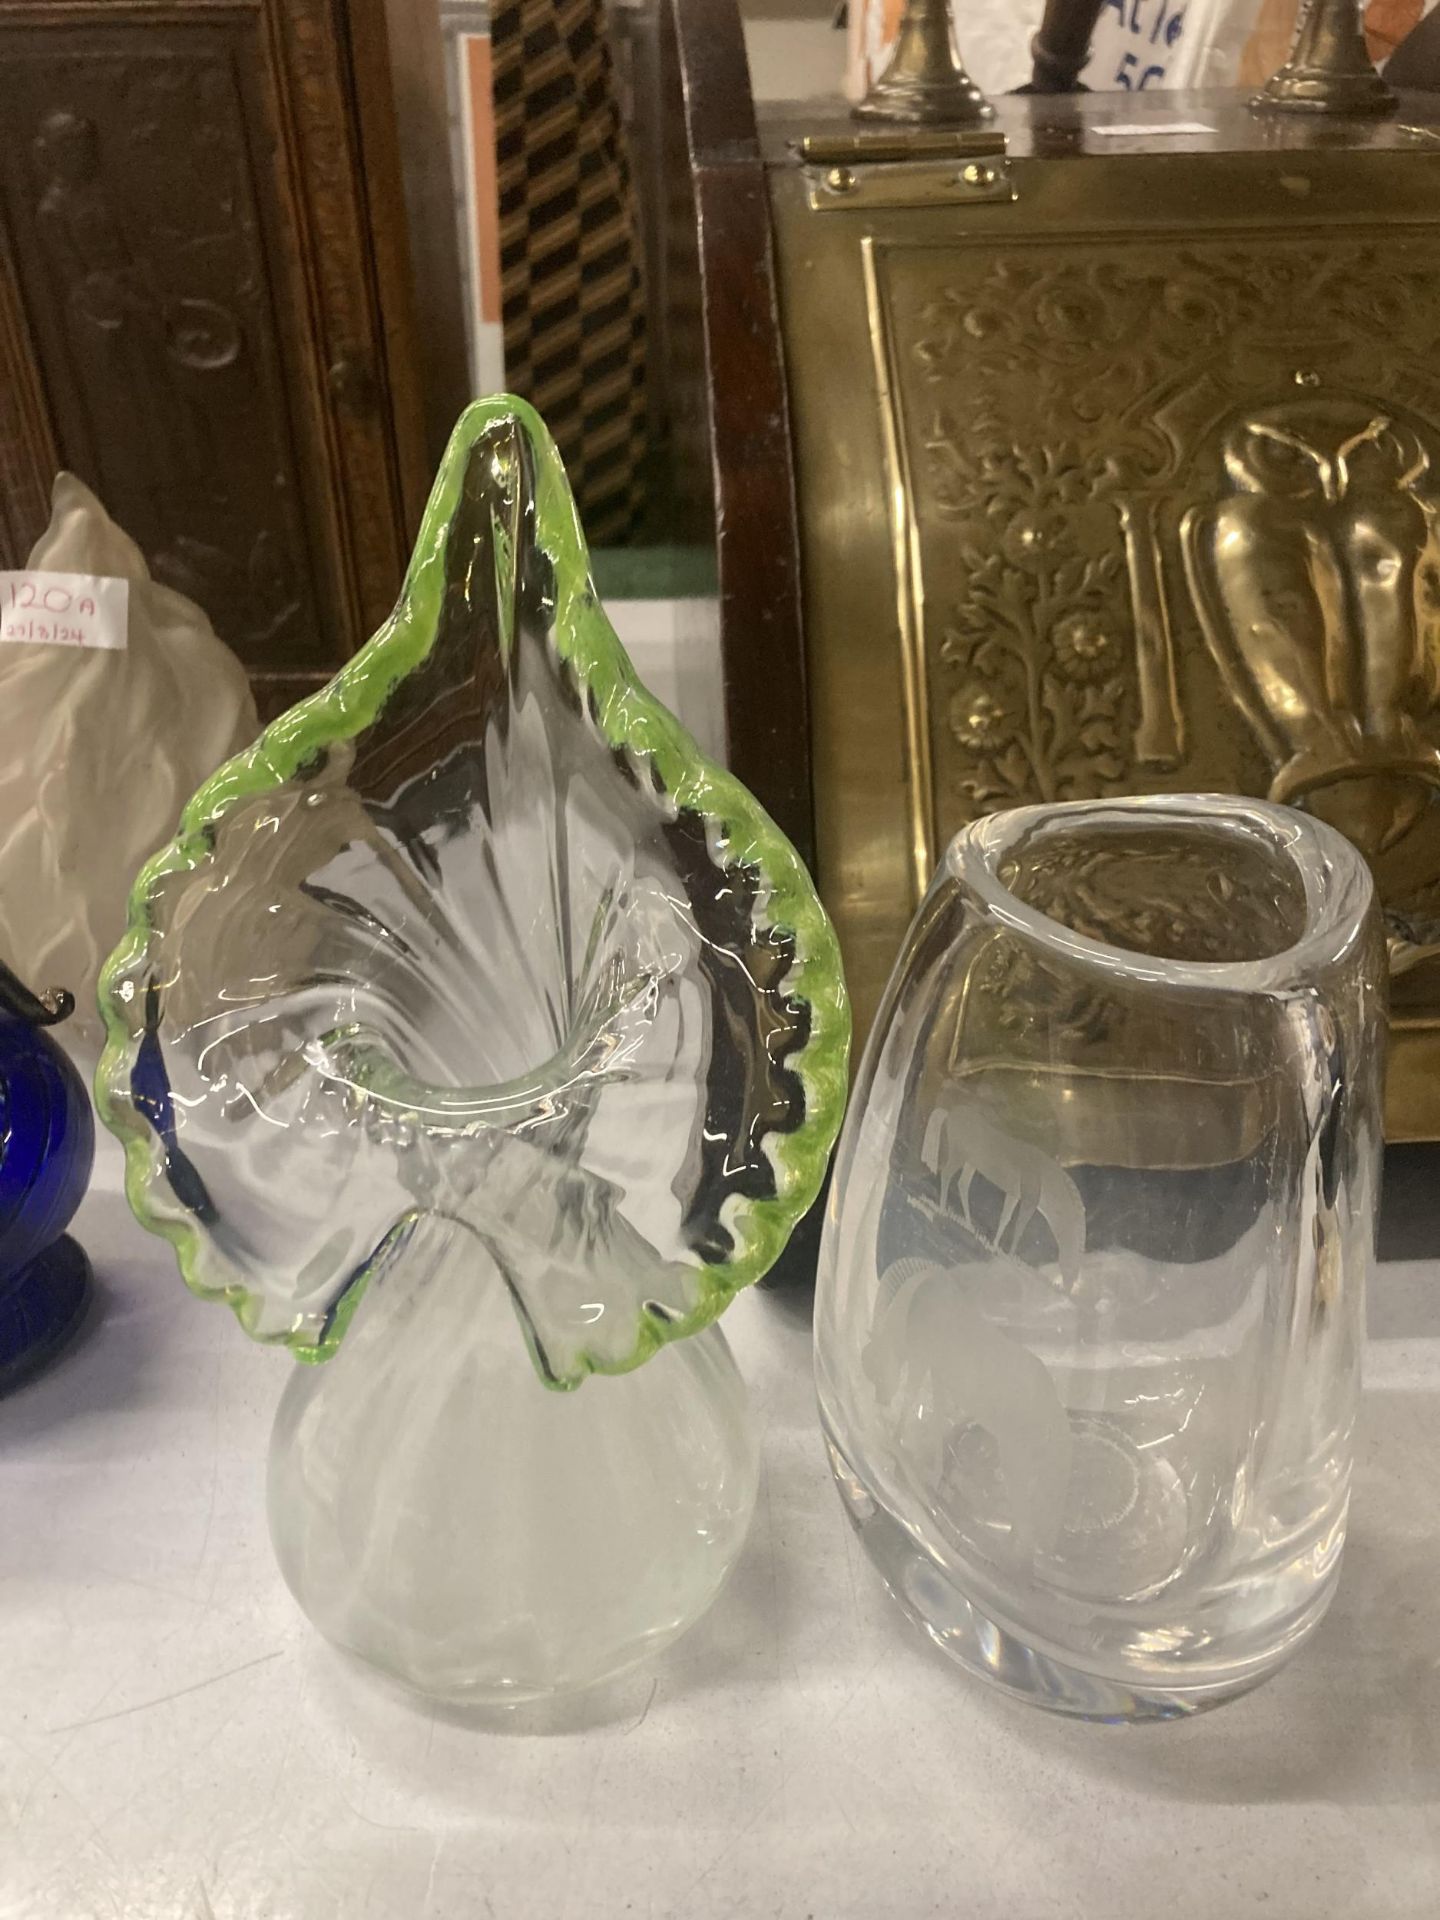 TWO GLASS VASES TO INCLUDE ONE WITH AN ENGRAVING OF HORSES PLUS AN ART GLASS VASE